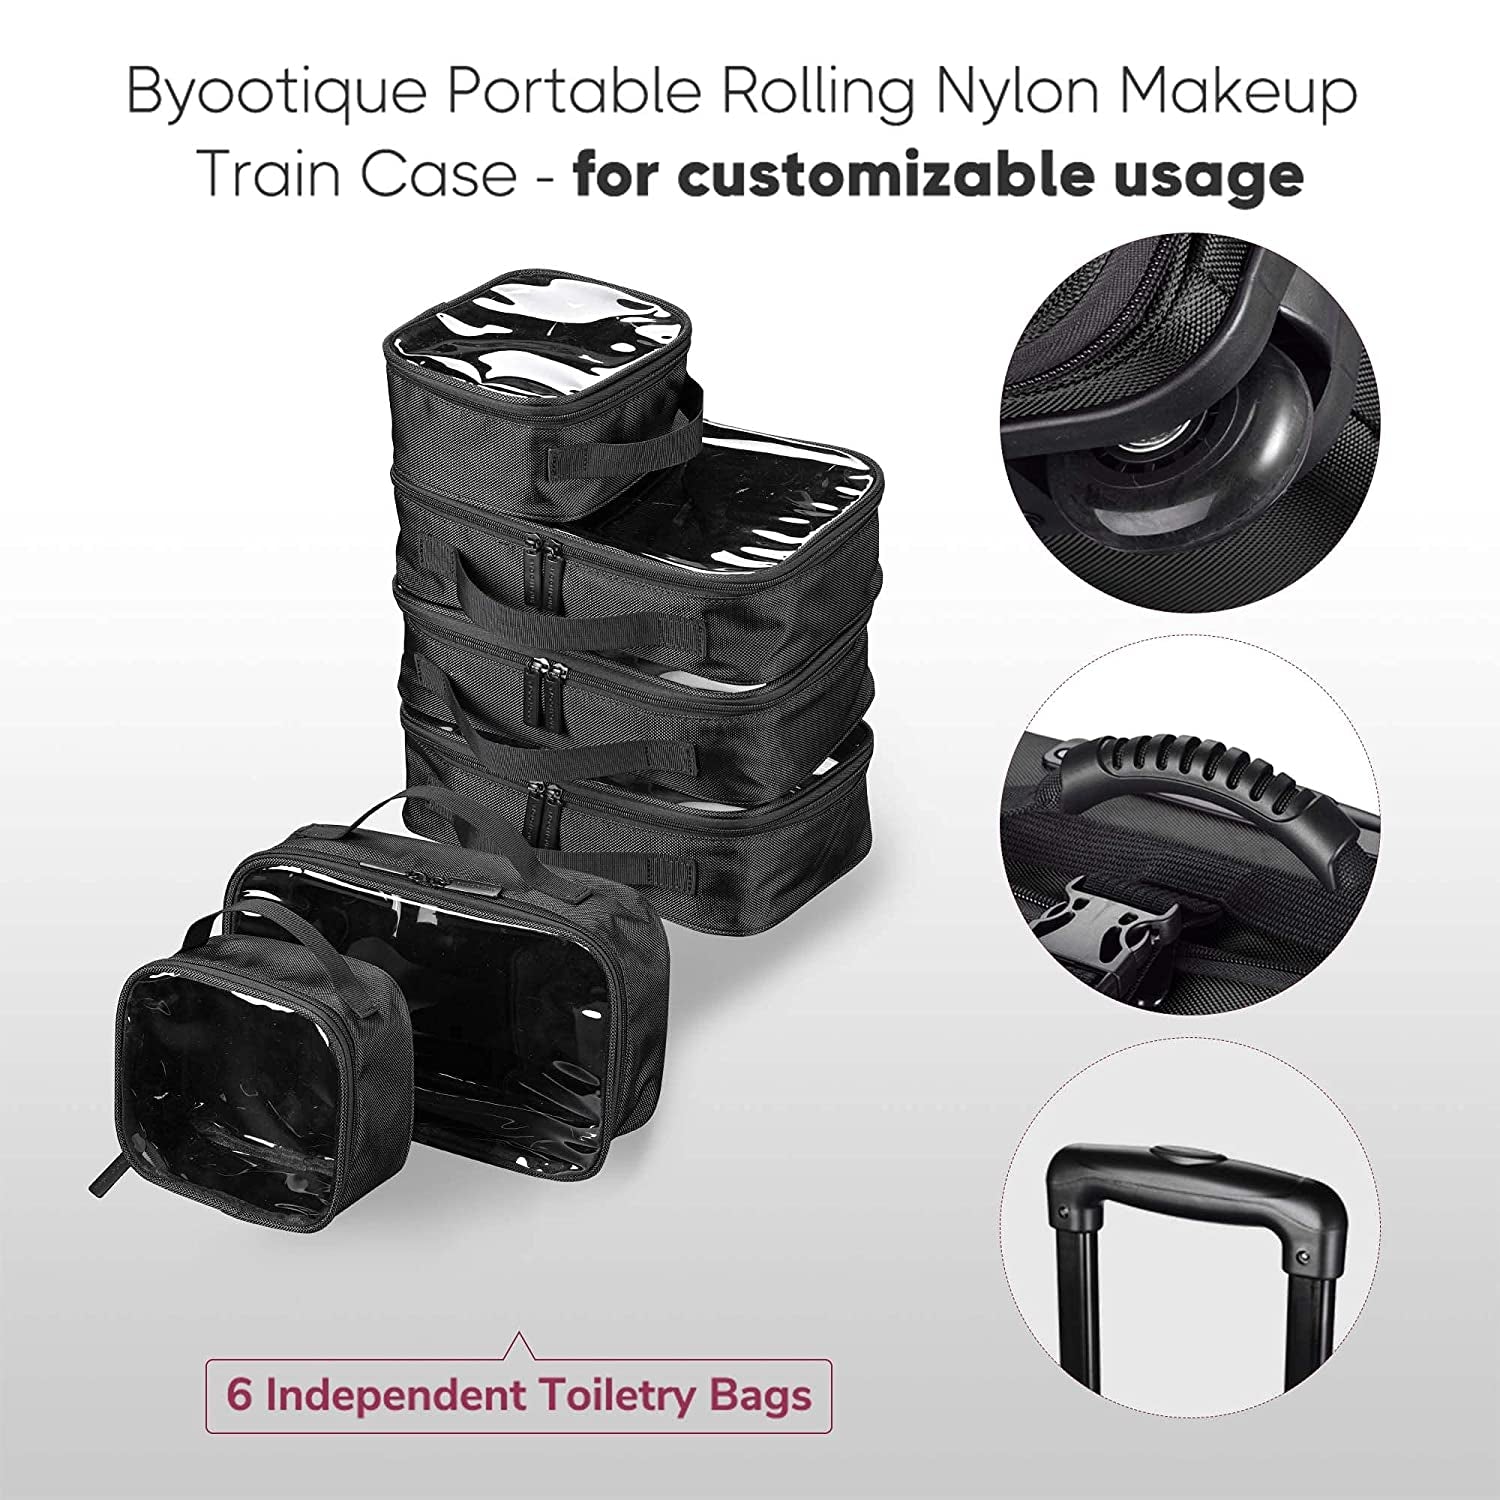 BYOOTIQUE Rolling Makeup Train Case Soft Sided Makeup Storage Cosmetic Organizer Carry on Travel with Side Pocket Removable Bag